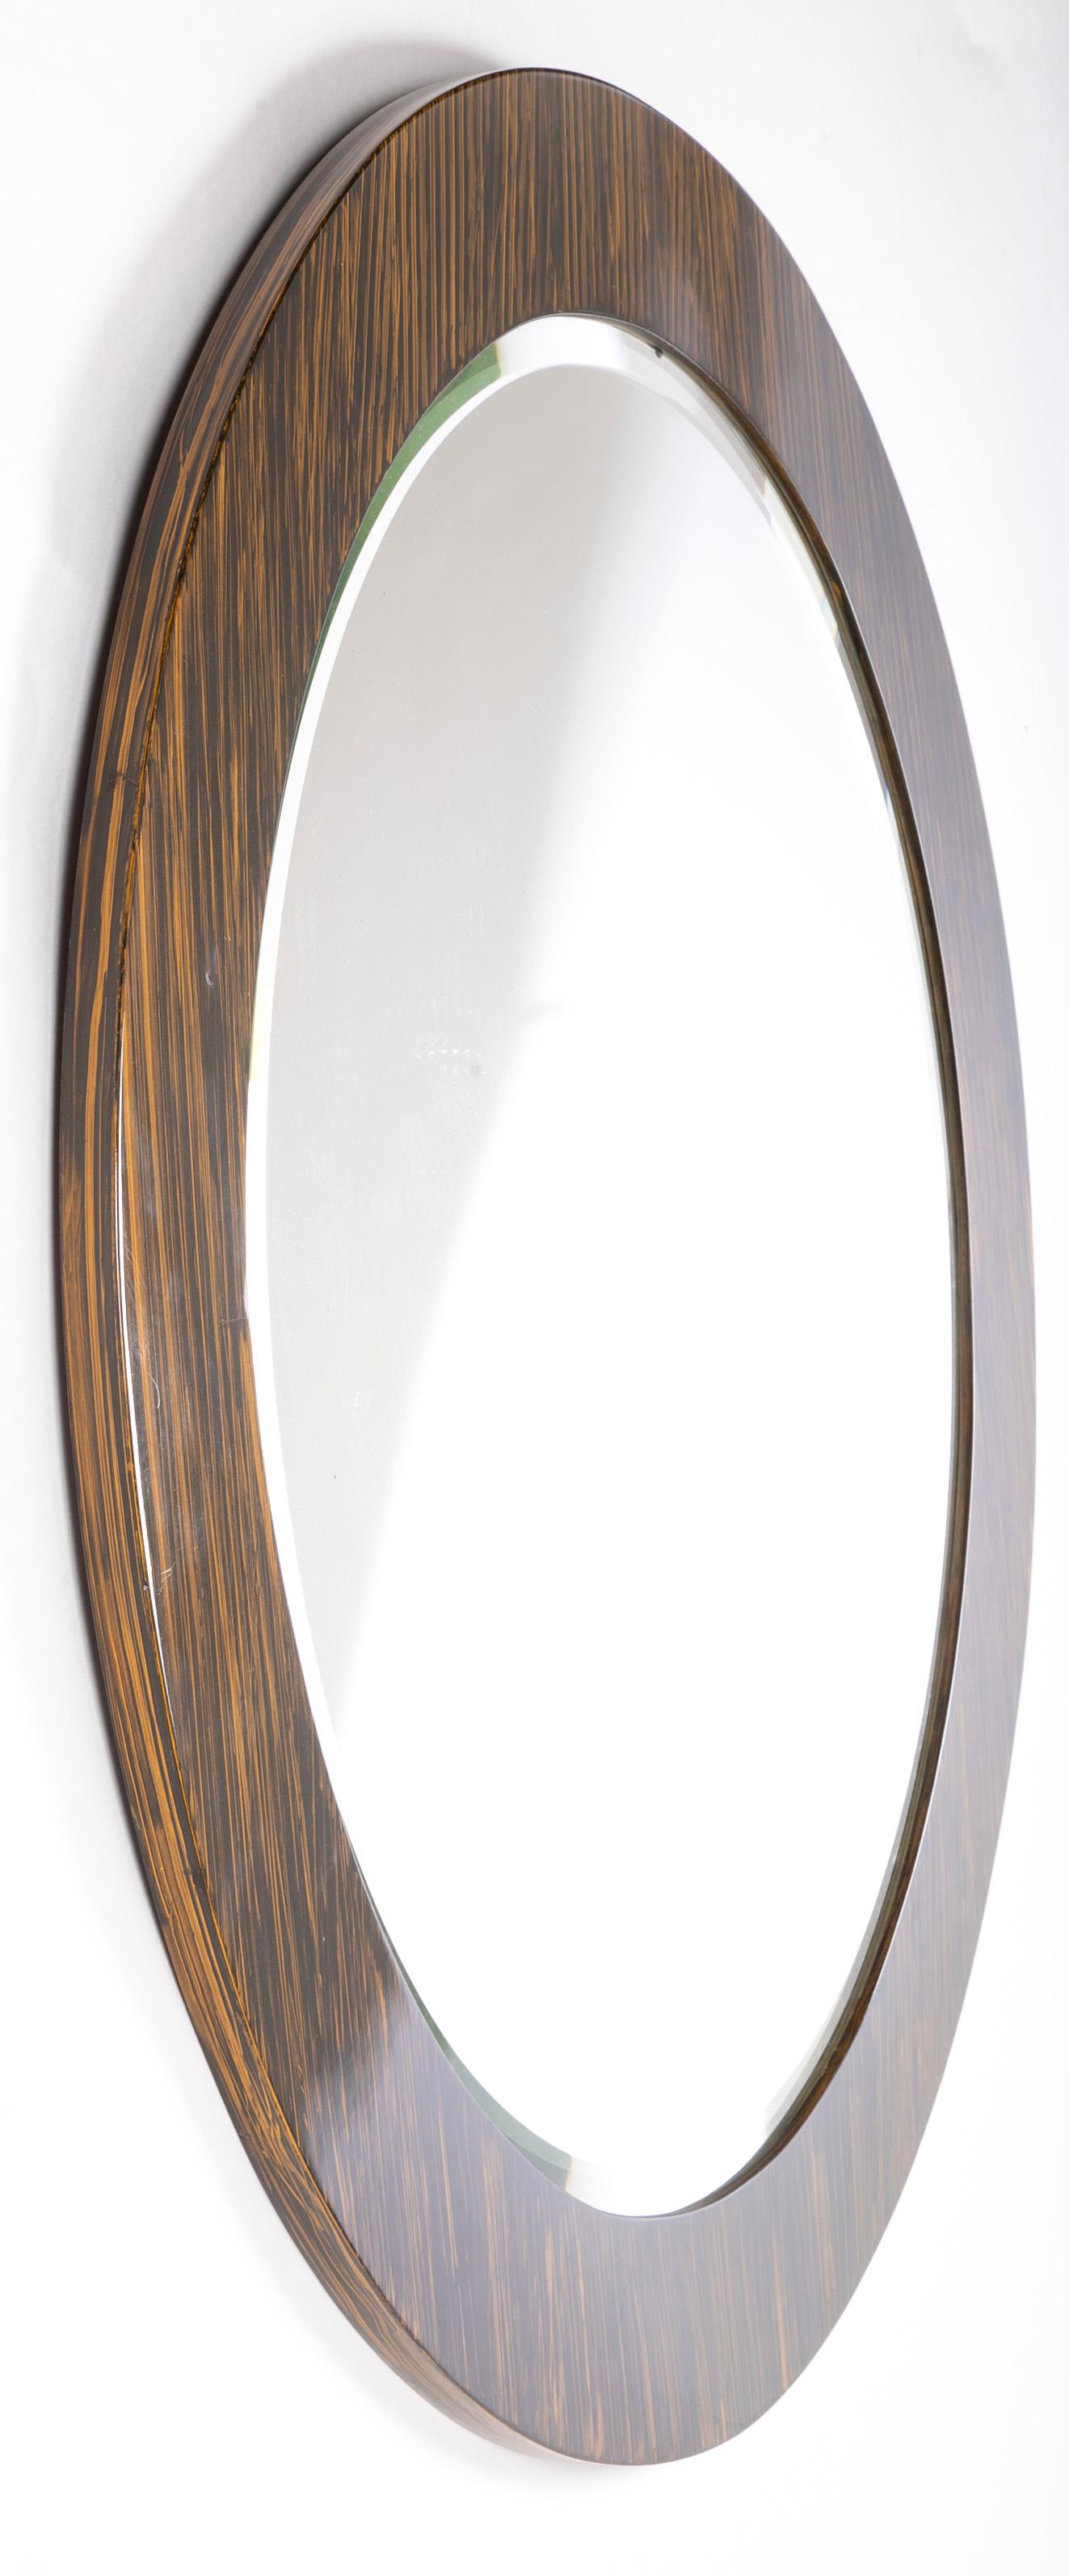 20th Century Karl Springer Style Round Mirror With Faux Tigers Eye Lacquered Finish For Sale